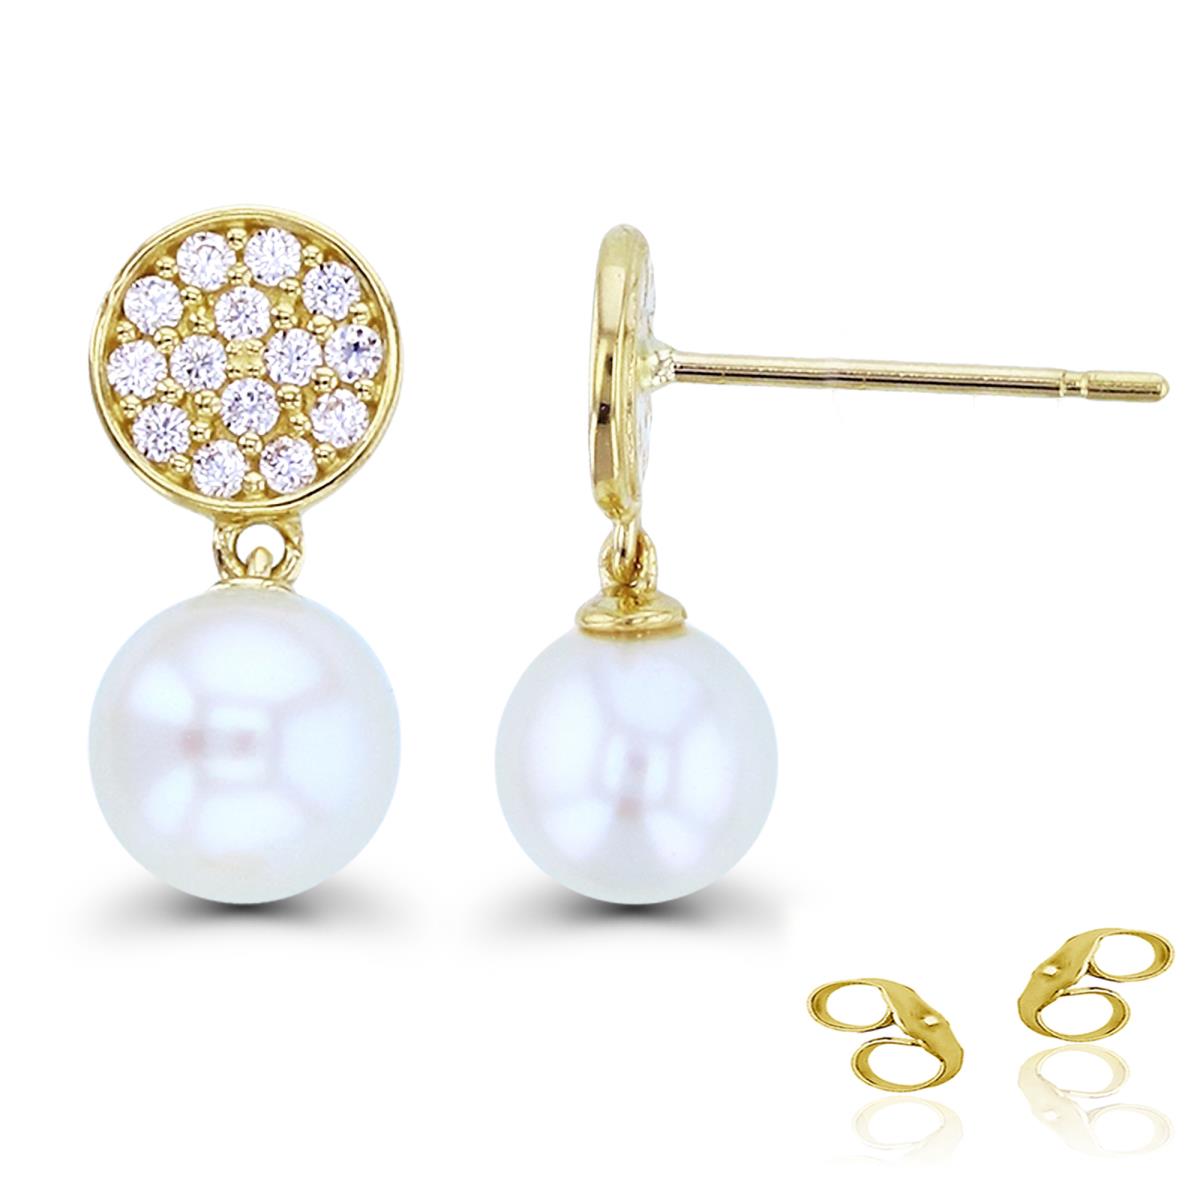 14K Yellow Gold 5mm FWP & Rnd Cr. White Sapphire Pave Circle Dangling Earrings with 4.5mm Clutch